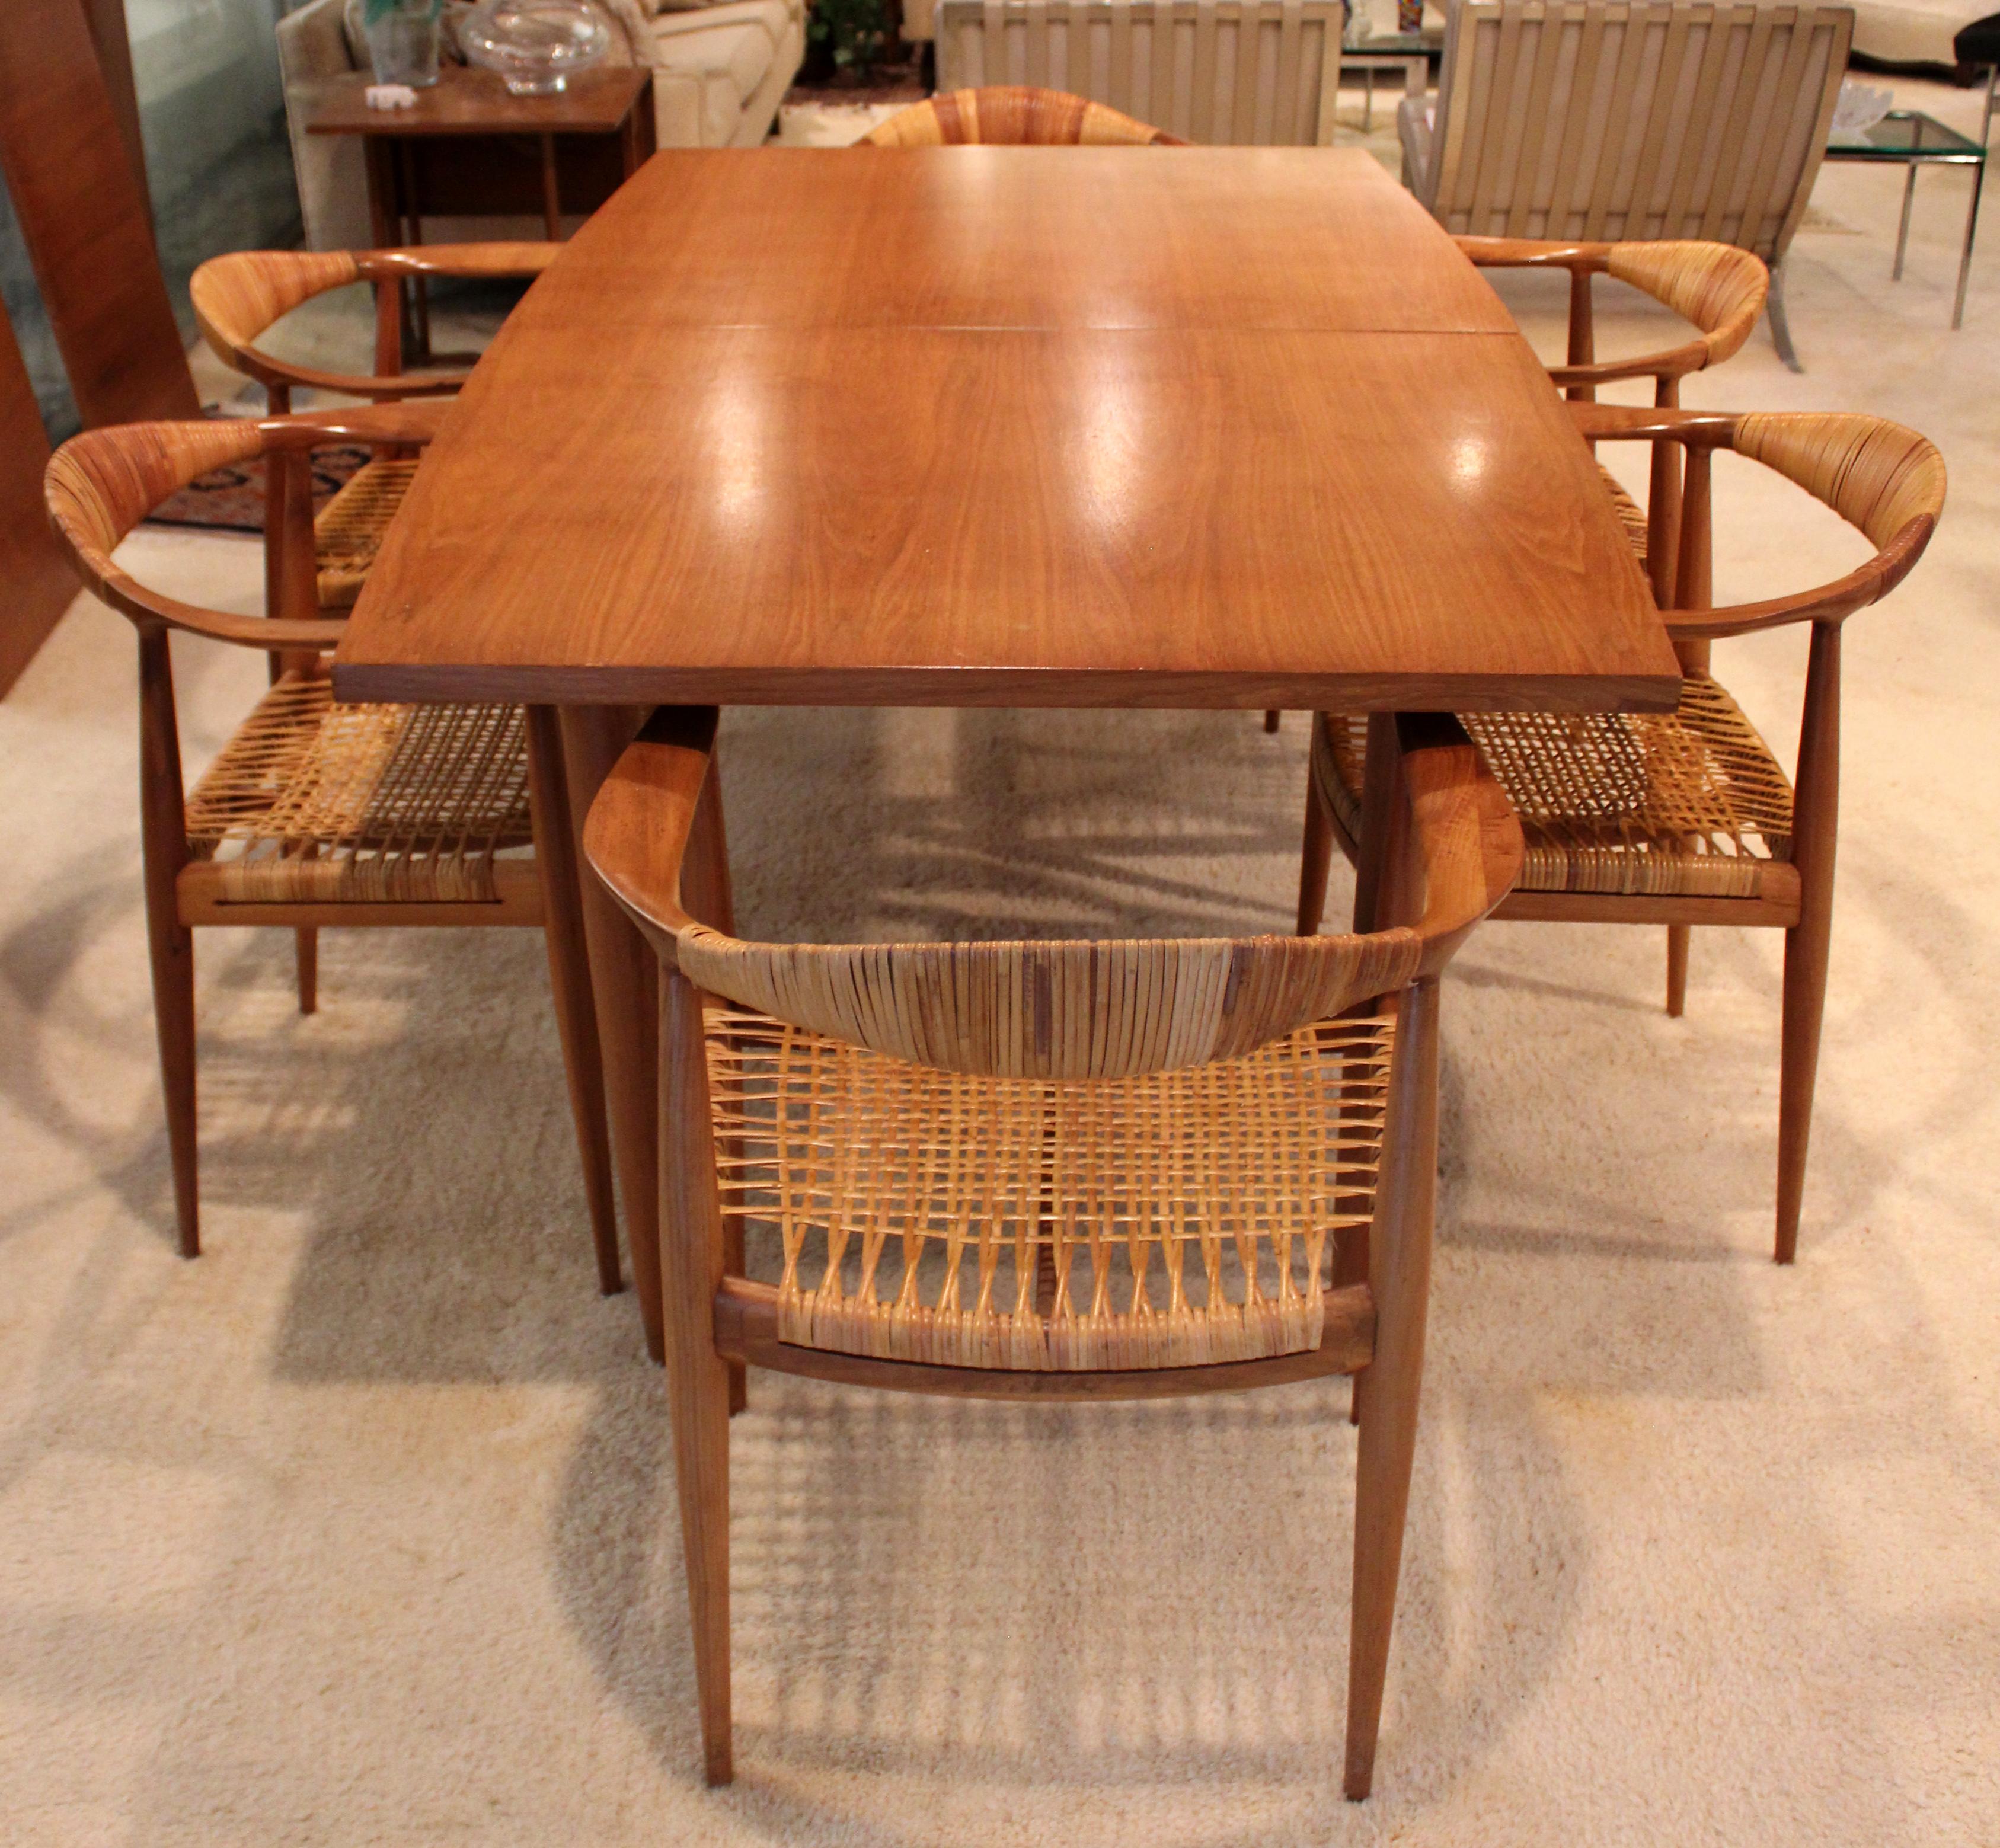 For your consideration is a sensational dining set, including expandable table, with three leaves, and six matching dining chairs, made in Denmark, by Hans Wegner, circa 1960s. In very good vintage condition. The dimensions of the table are 72